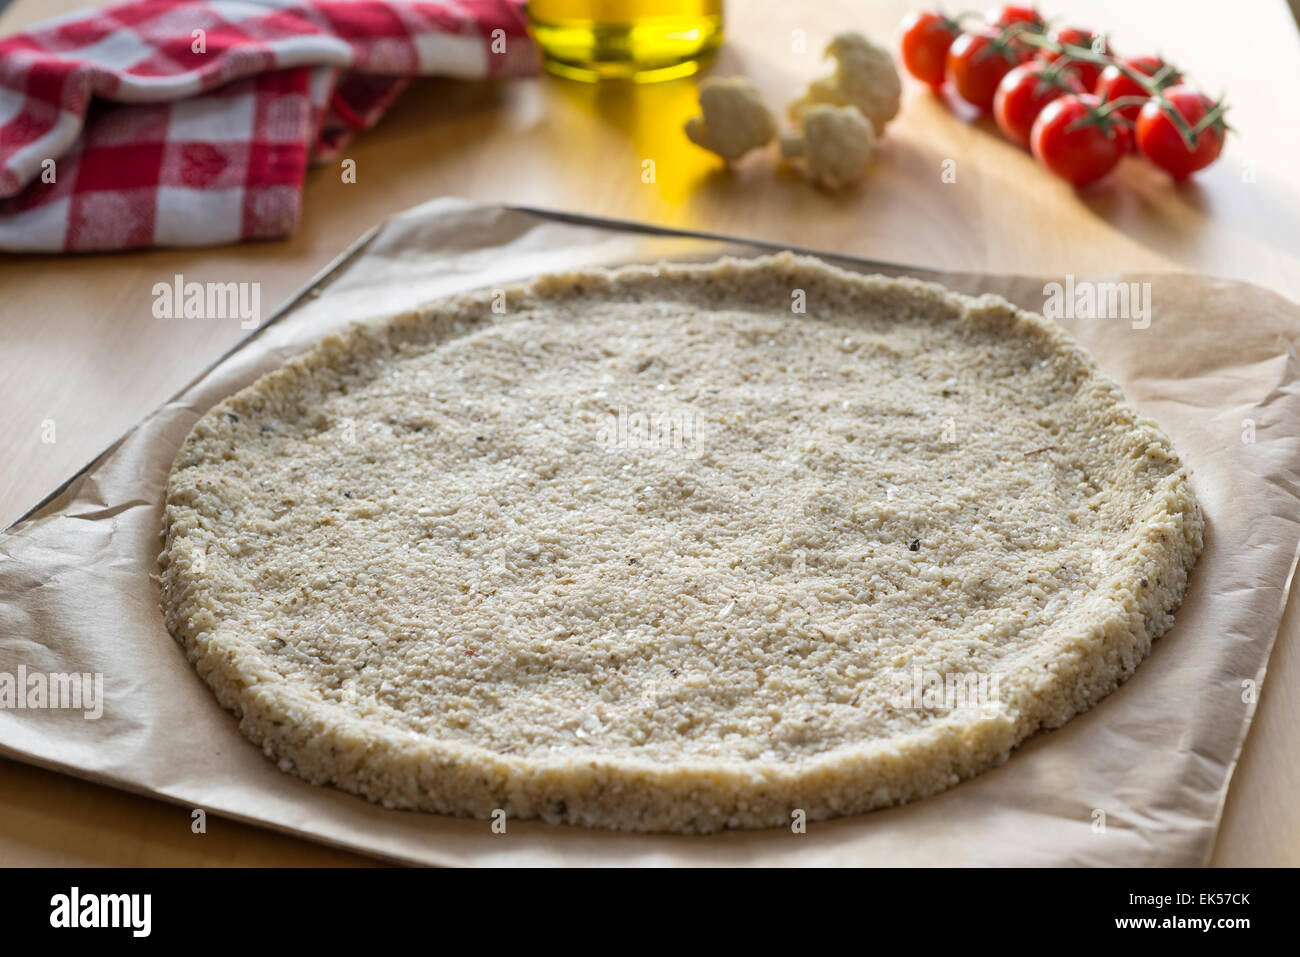 Pizza crust made from cauliflower rather than traditional bread dough Stock Photo